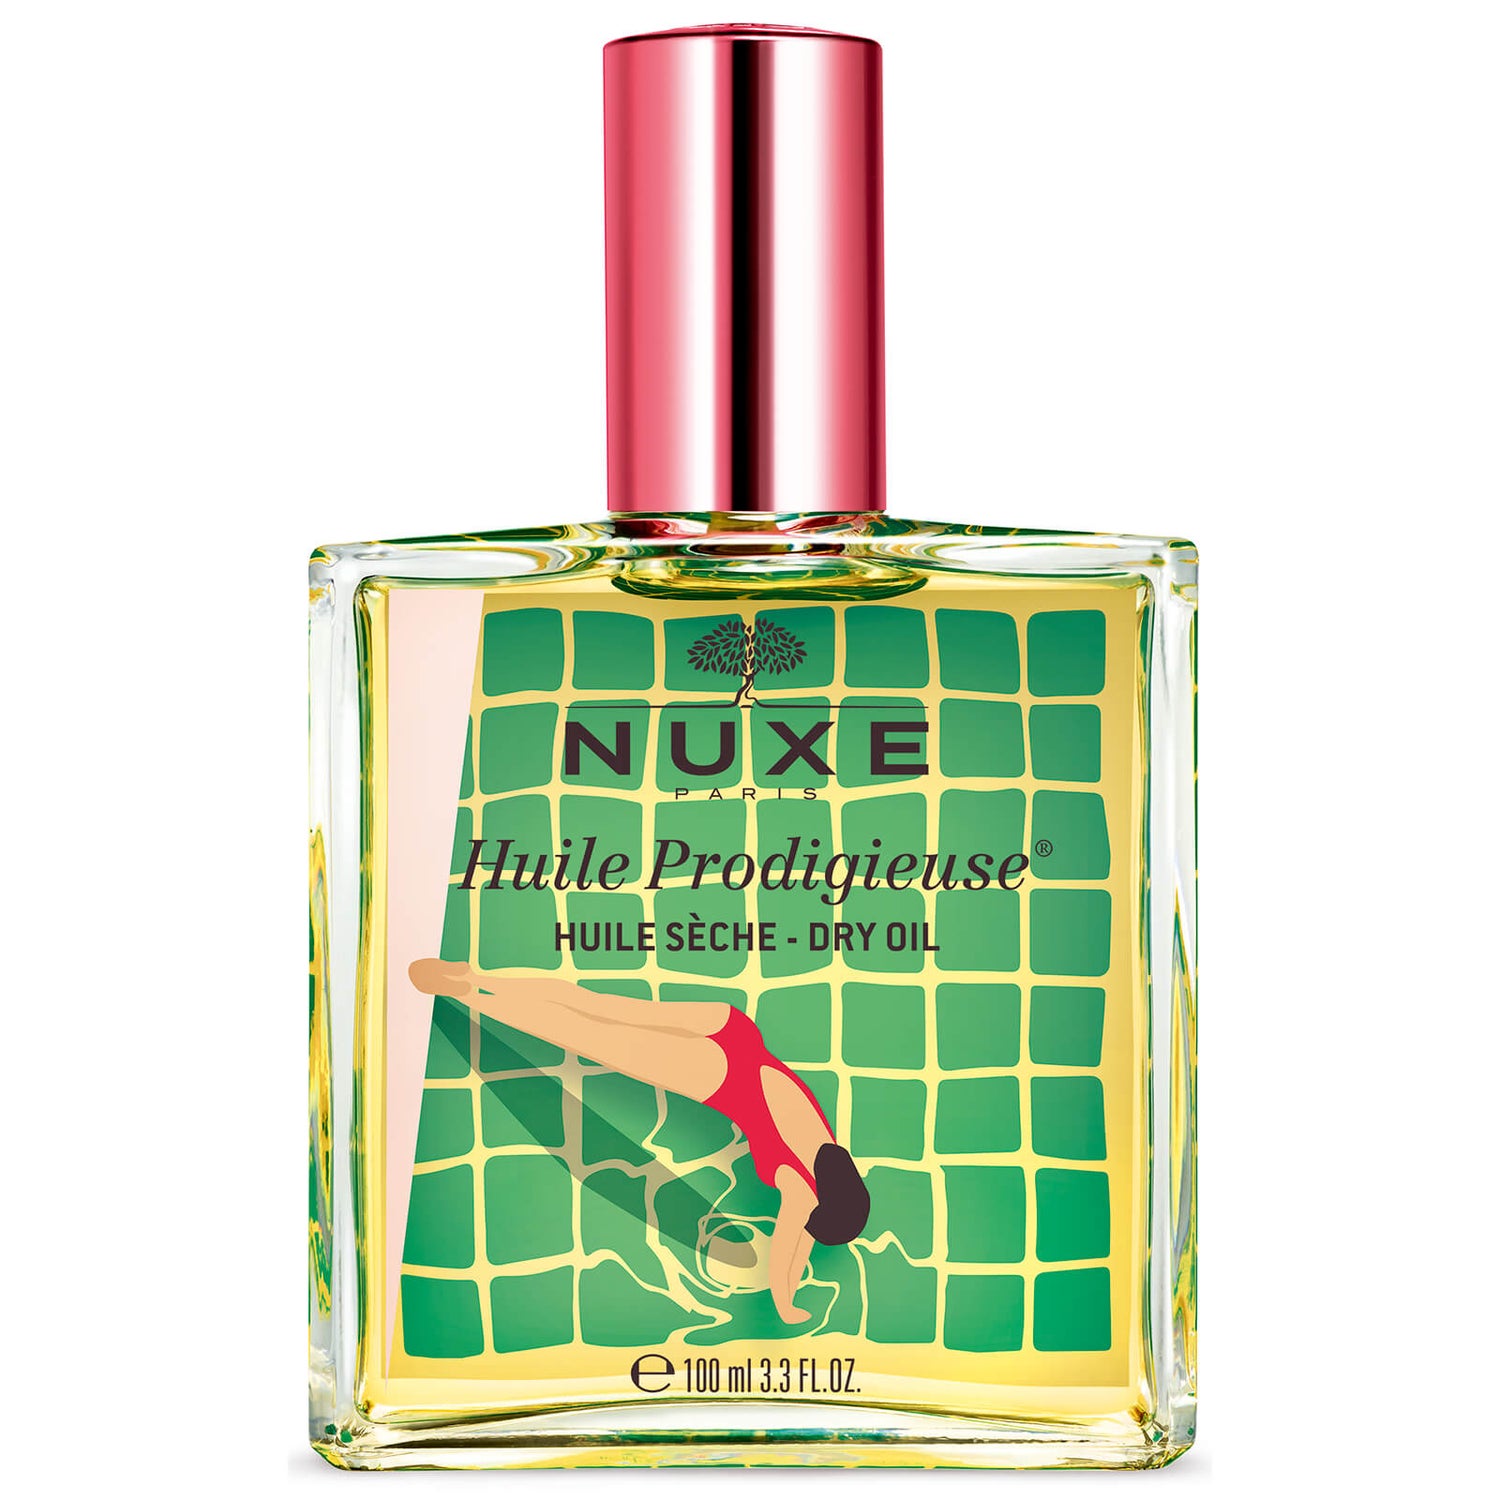 NUXE Huile Prodigieuse Limited Edition Oil 100ml - Coral